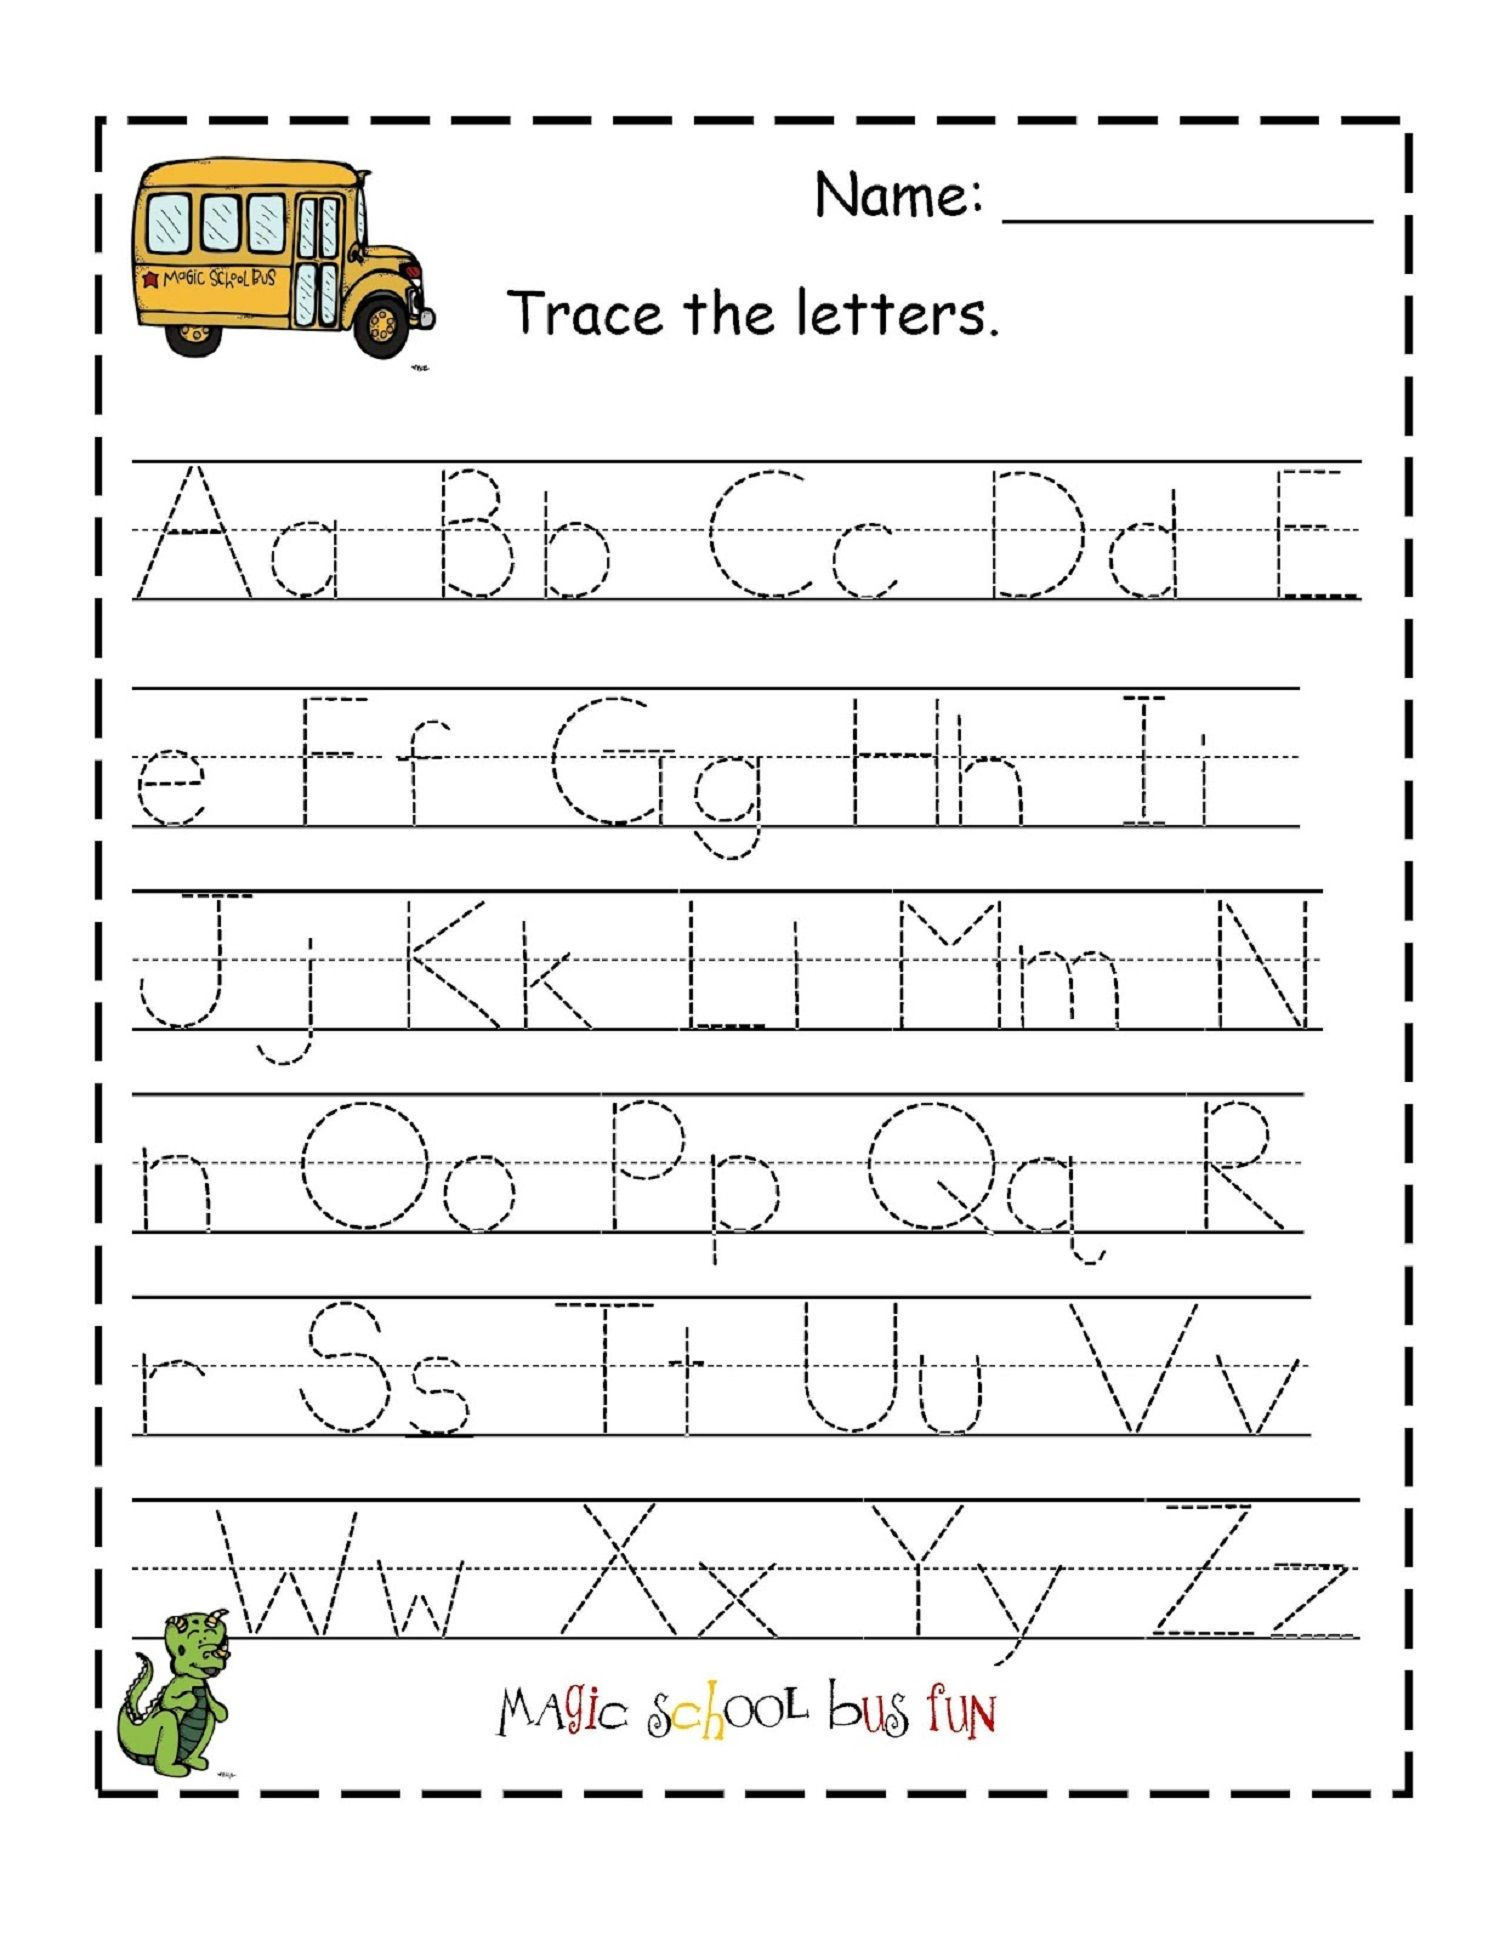 Traceable Alphabet For Learning Exercise | Letter Tracing in Dotted Letters For Tracing Preschool